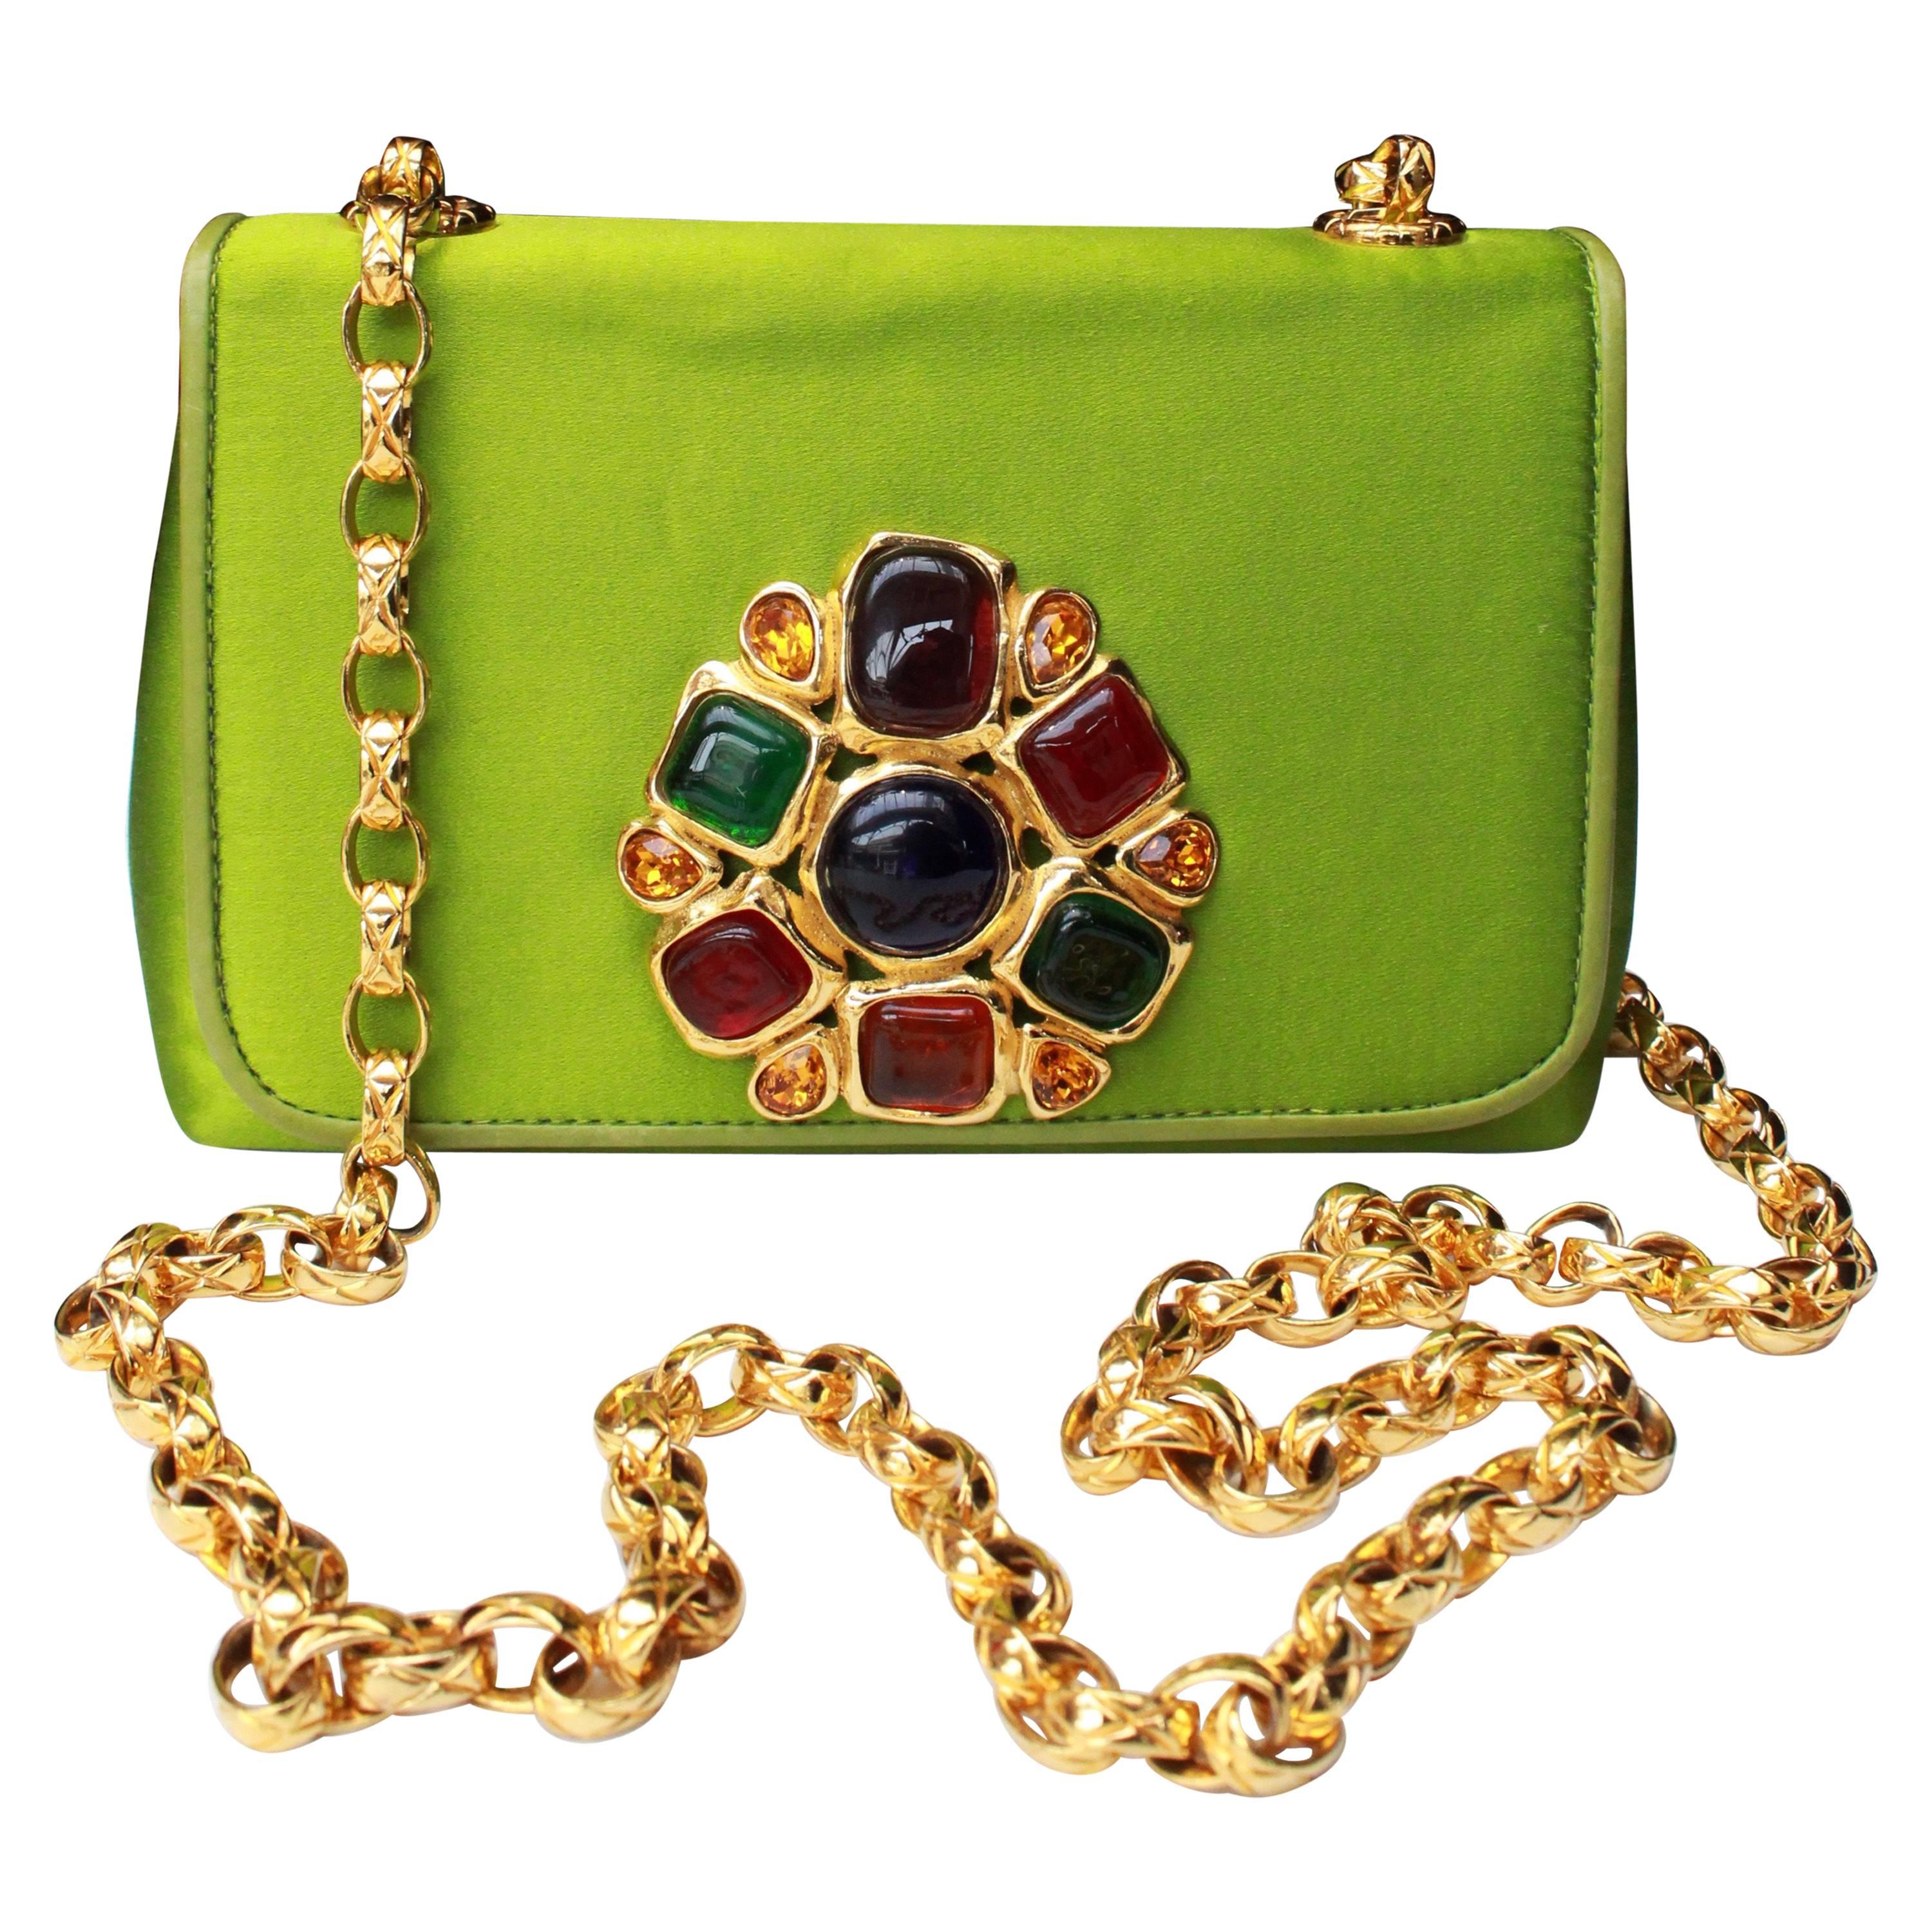 Chanel green satin jewel evening bag For Sale